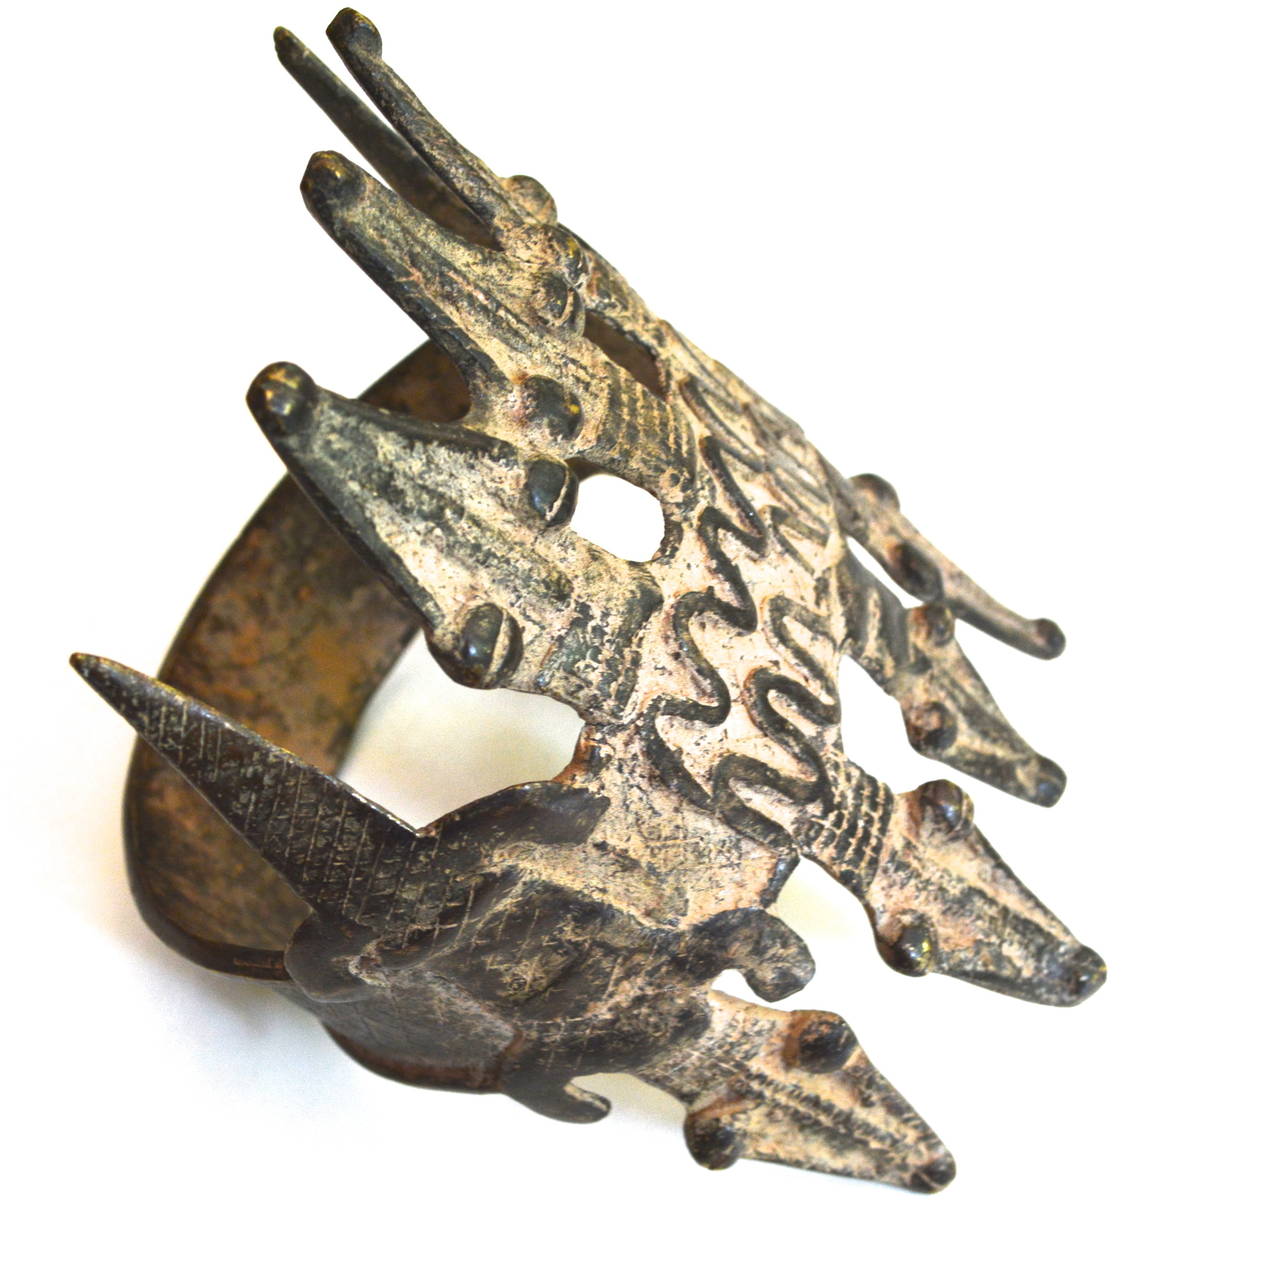 Old Lobi of Burkina Faso large crocodile bronze armband with a great patina and exceptional design. About 11oz. The crocodile is regarded as a protector or more sacred spirit. The crocodile iconography is believed to help ward off evil and is